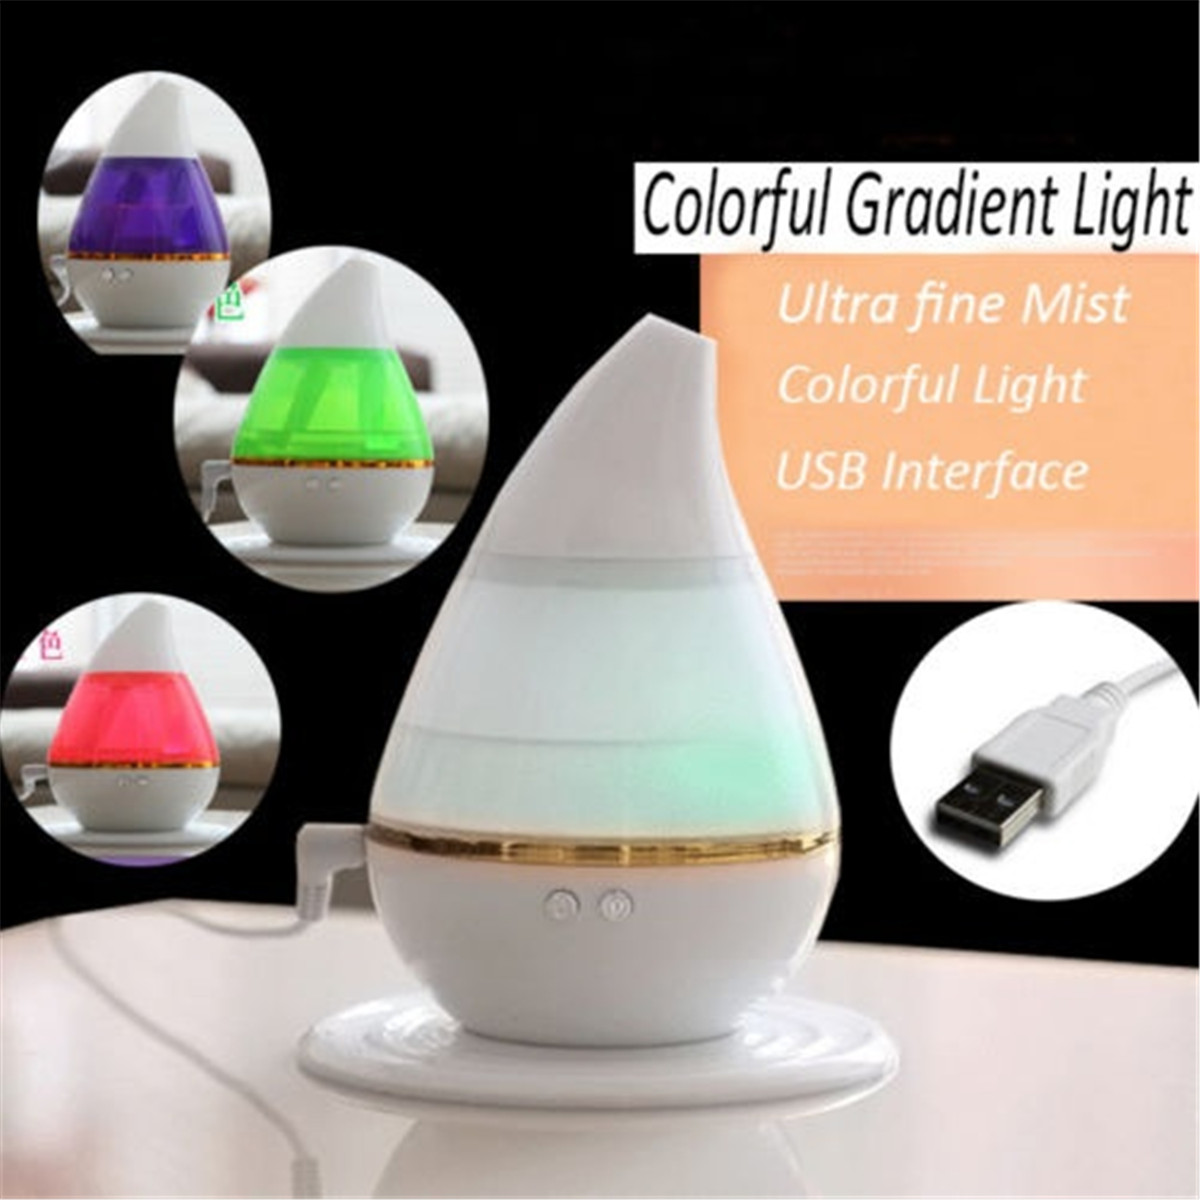 250ml-Ultrasonic-Air-Humidifier-USB-Charging-Essential-Oil-Diffuser-LED-Light-Purifier-for-Home-Offi-1787140-3